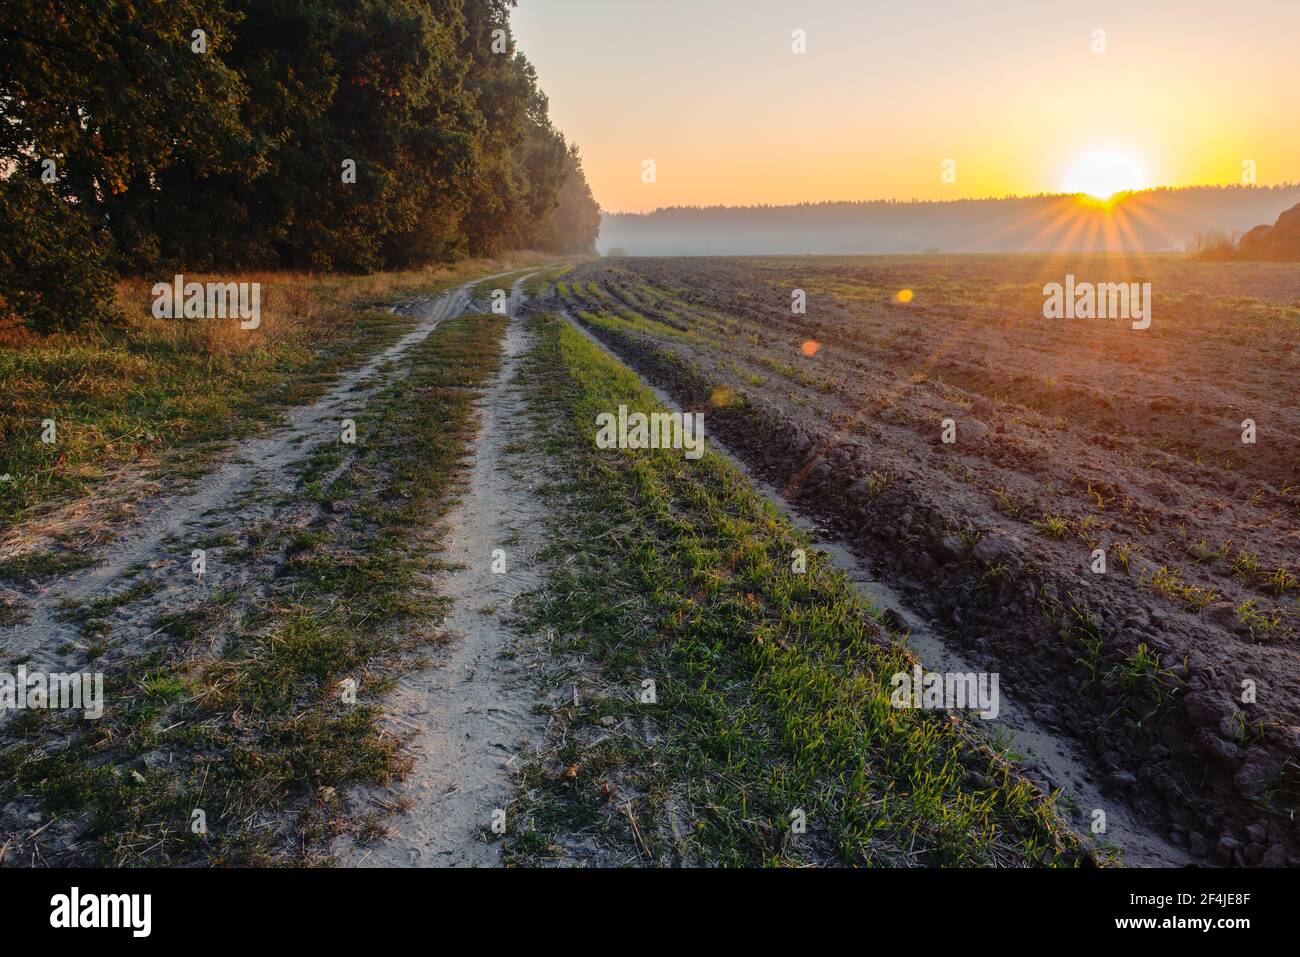 Beautiful sunrise on a country road along a plowed field. Stock Photo